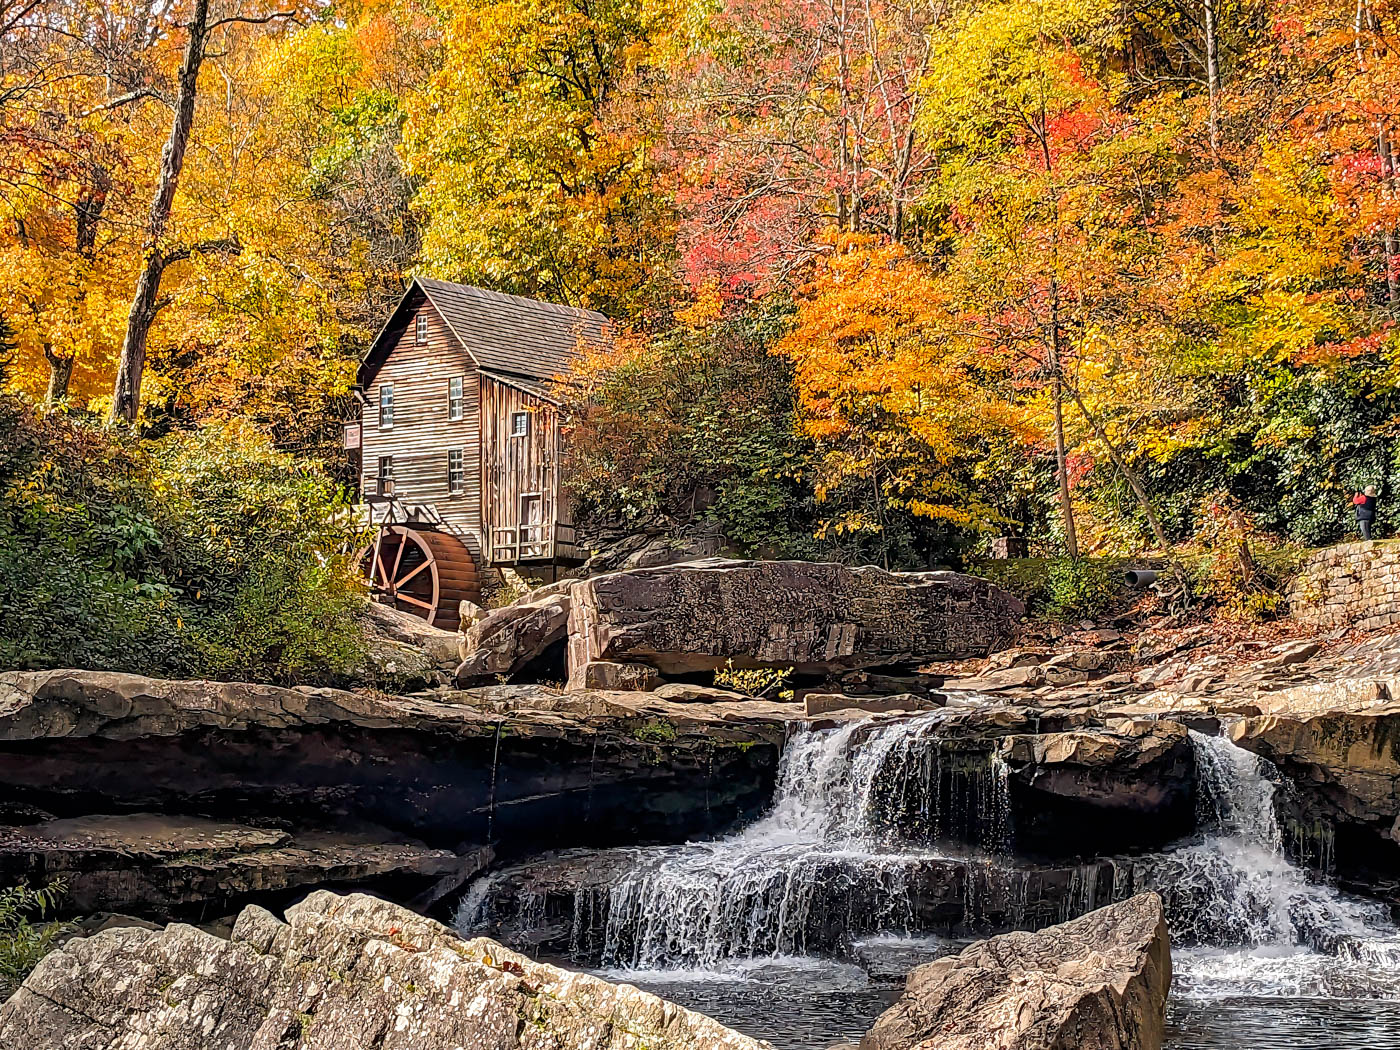 Gristmill in the Fall by John Larson, FPSA, MPSA2